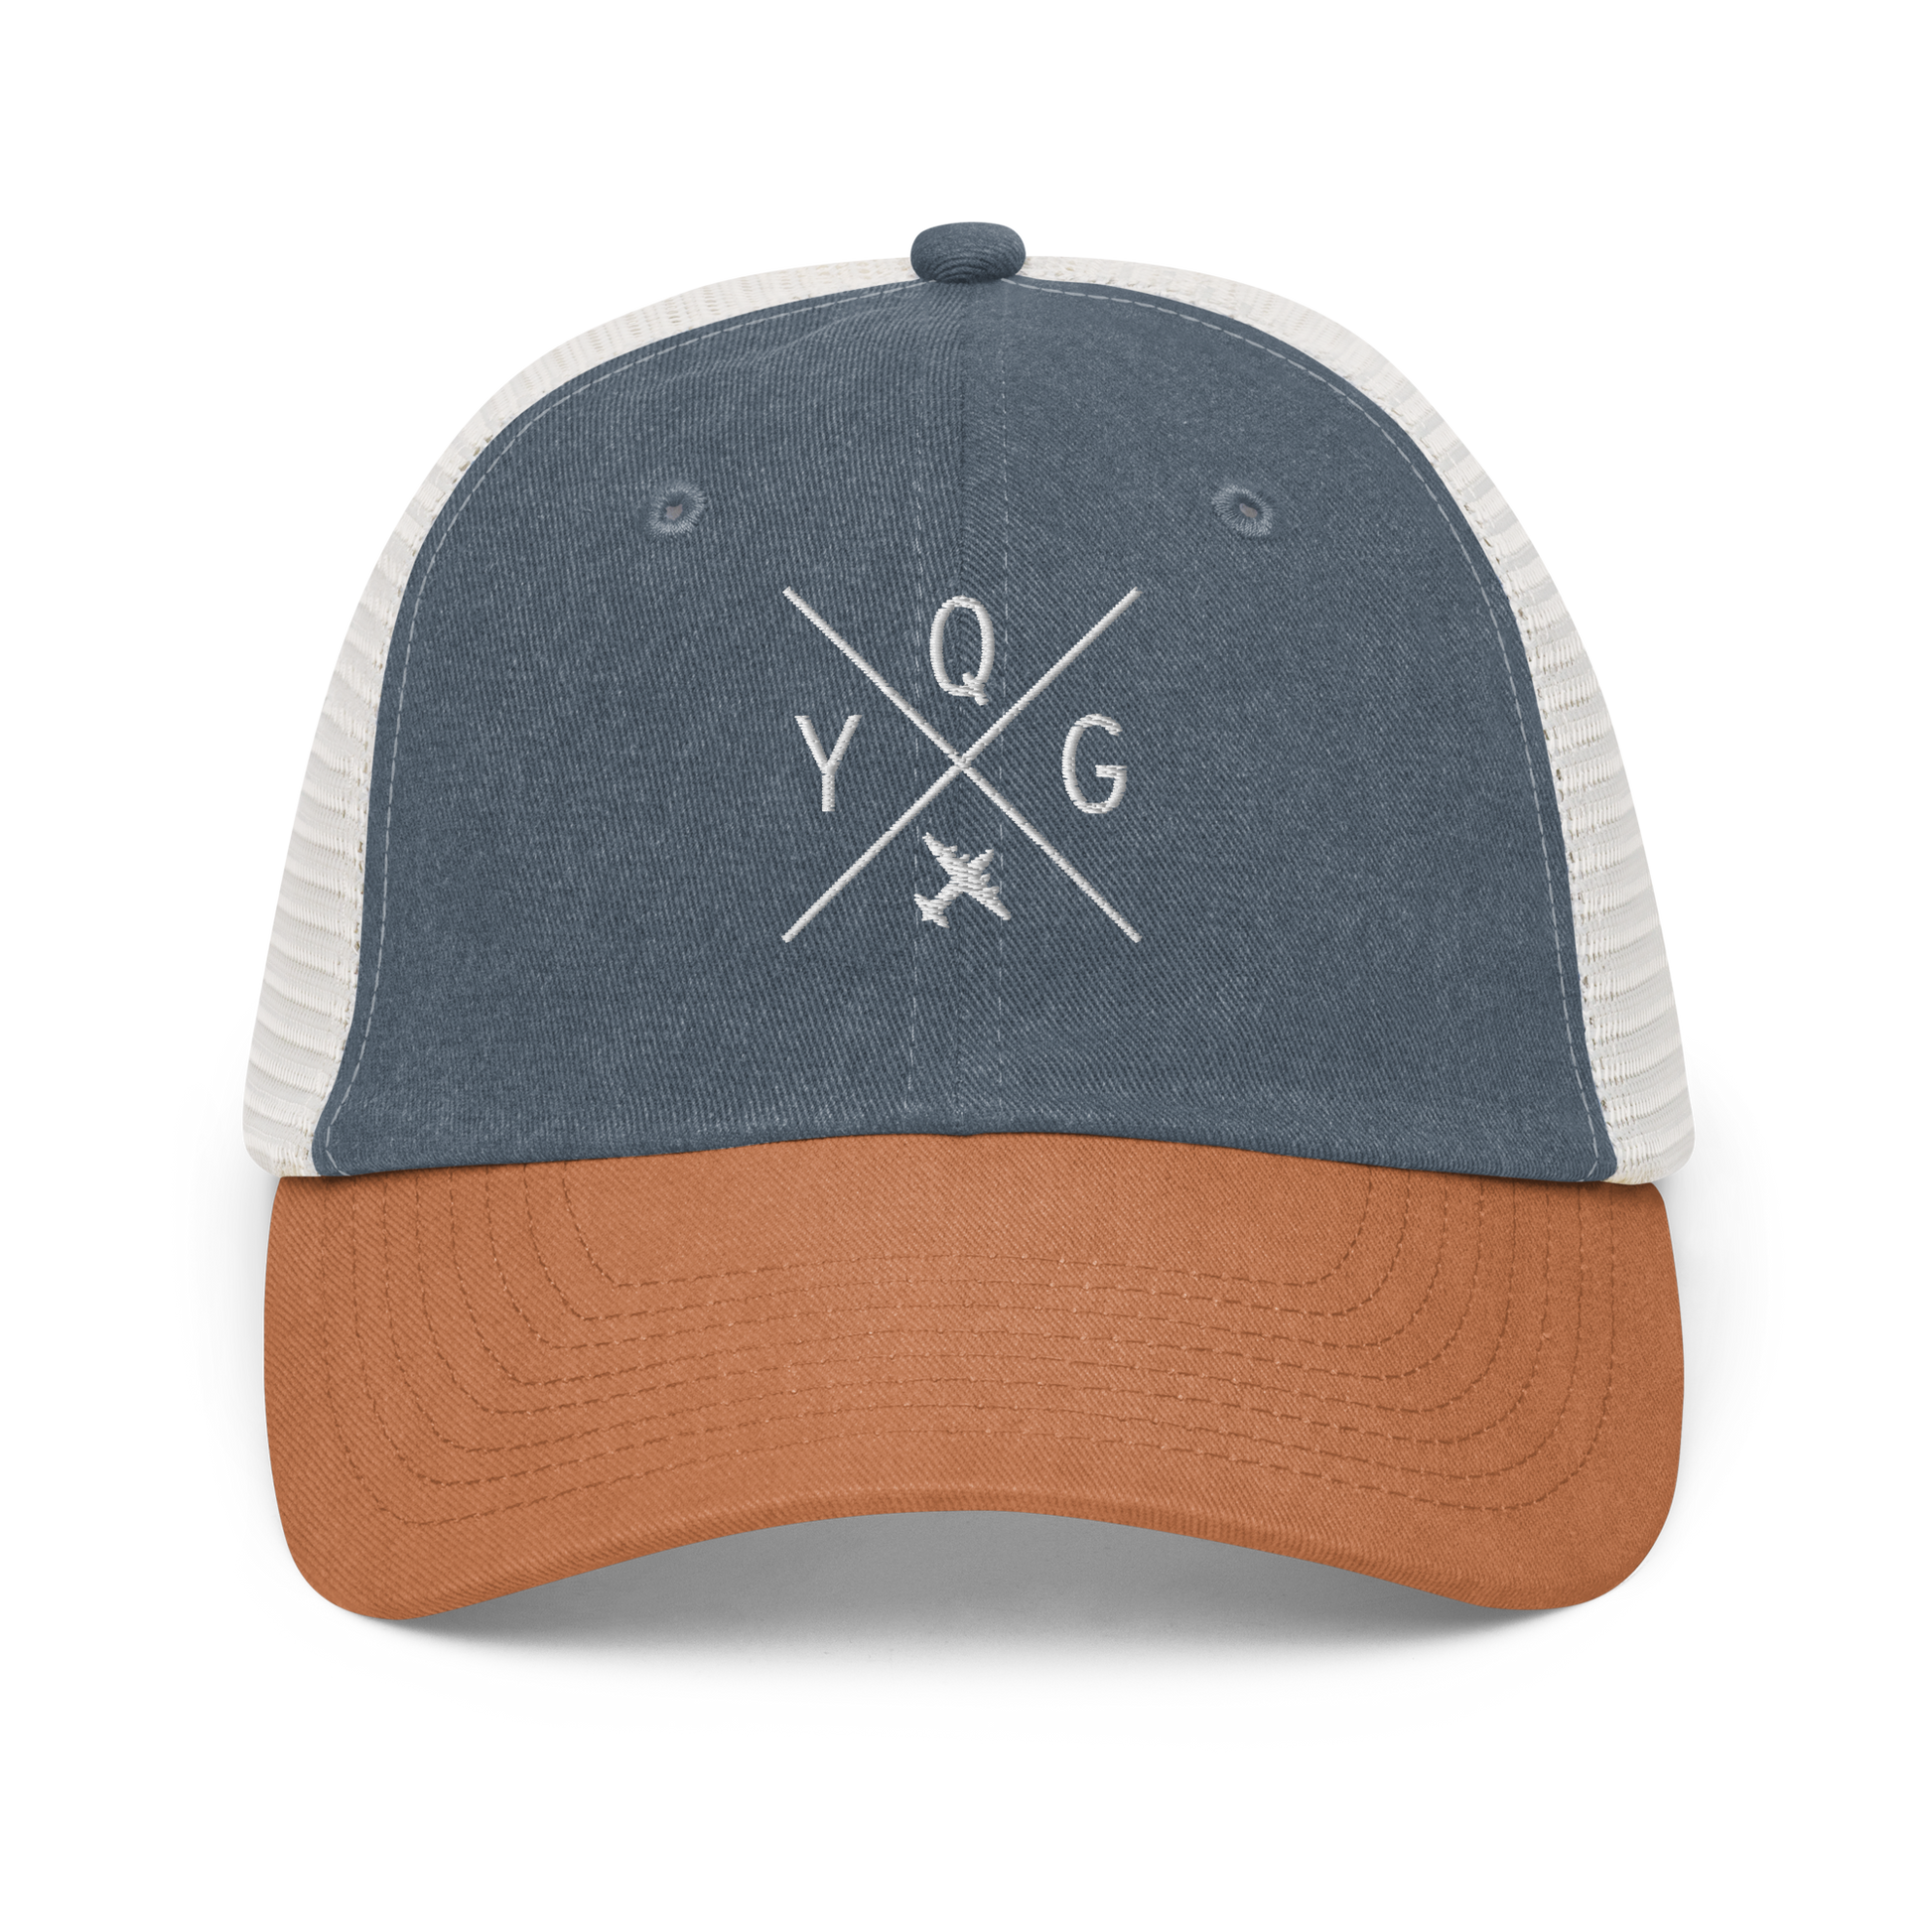 YHM Designs - YQG Windsor Pigment-Dyed Trucker Cap - Crossed-X Design with Airport Code and Vintage Propliner - White Embroidery - Image 15